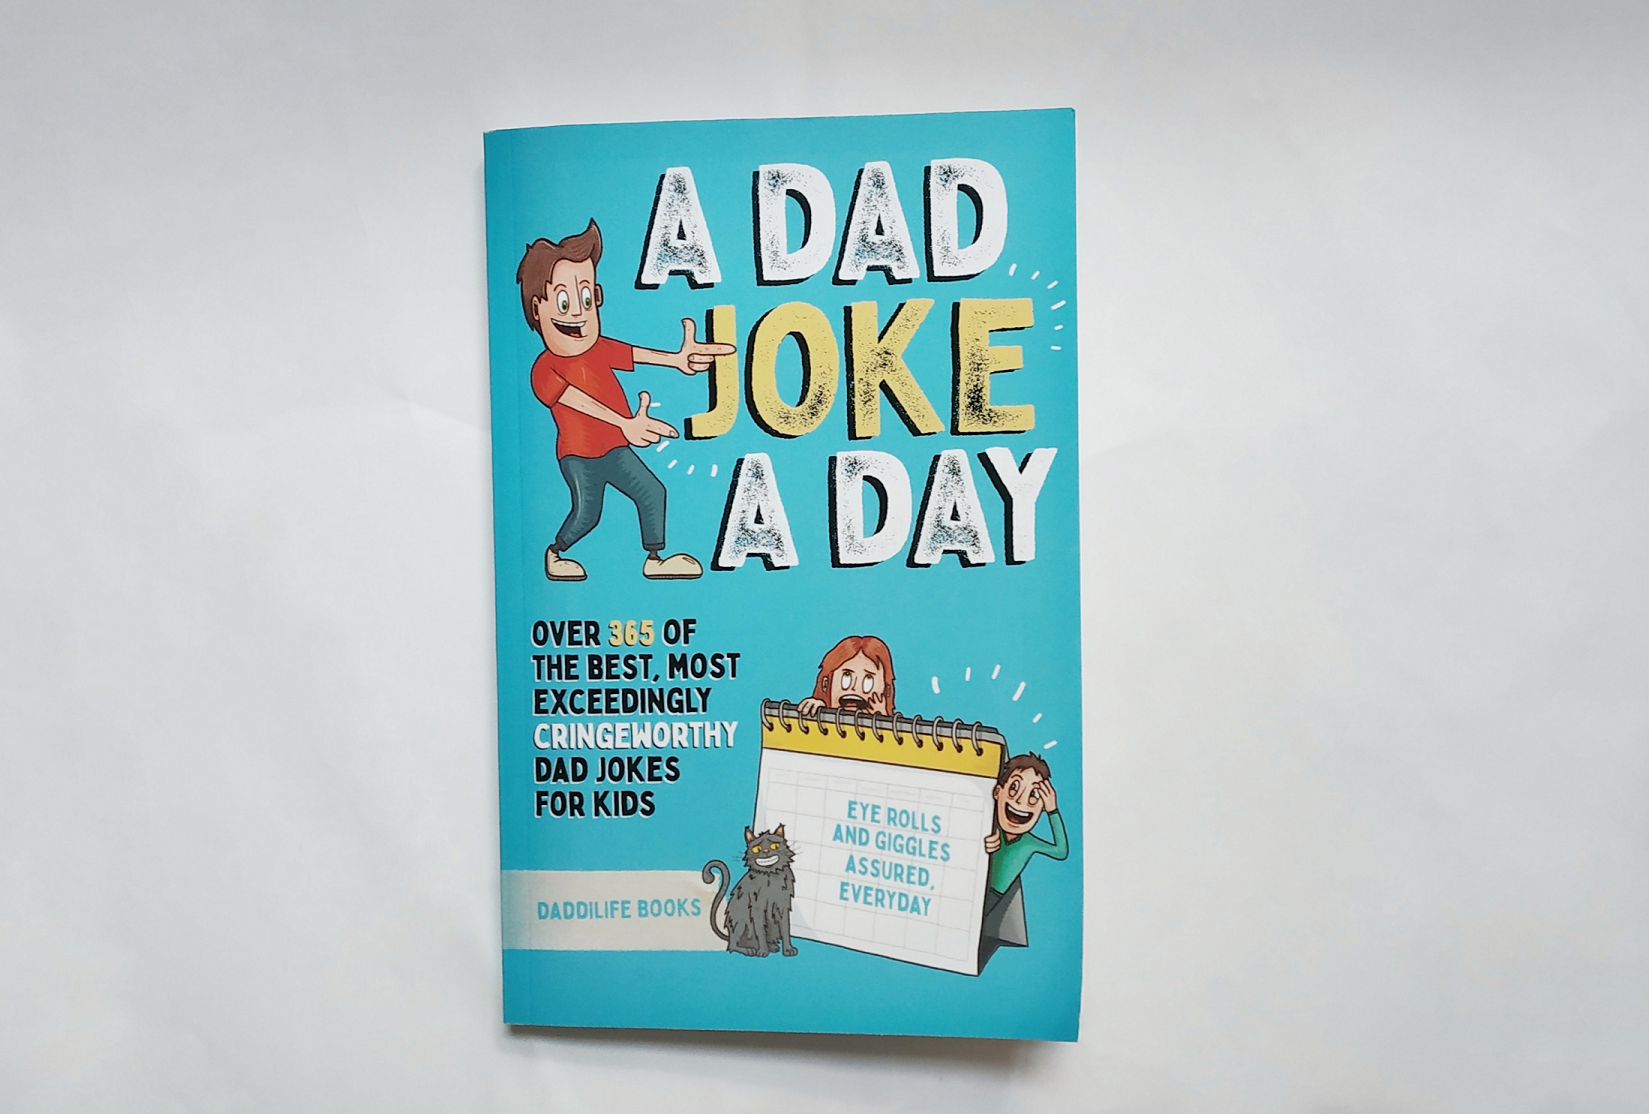 dad joke father's day